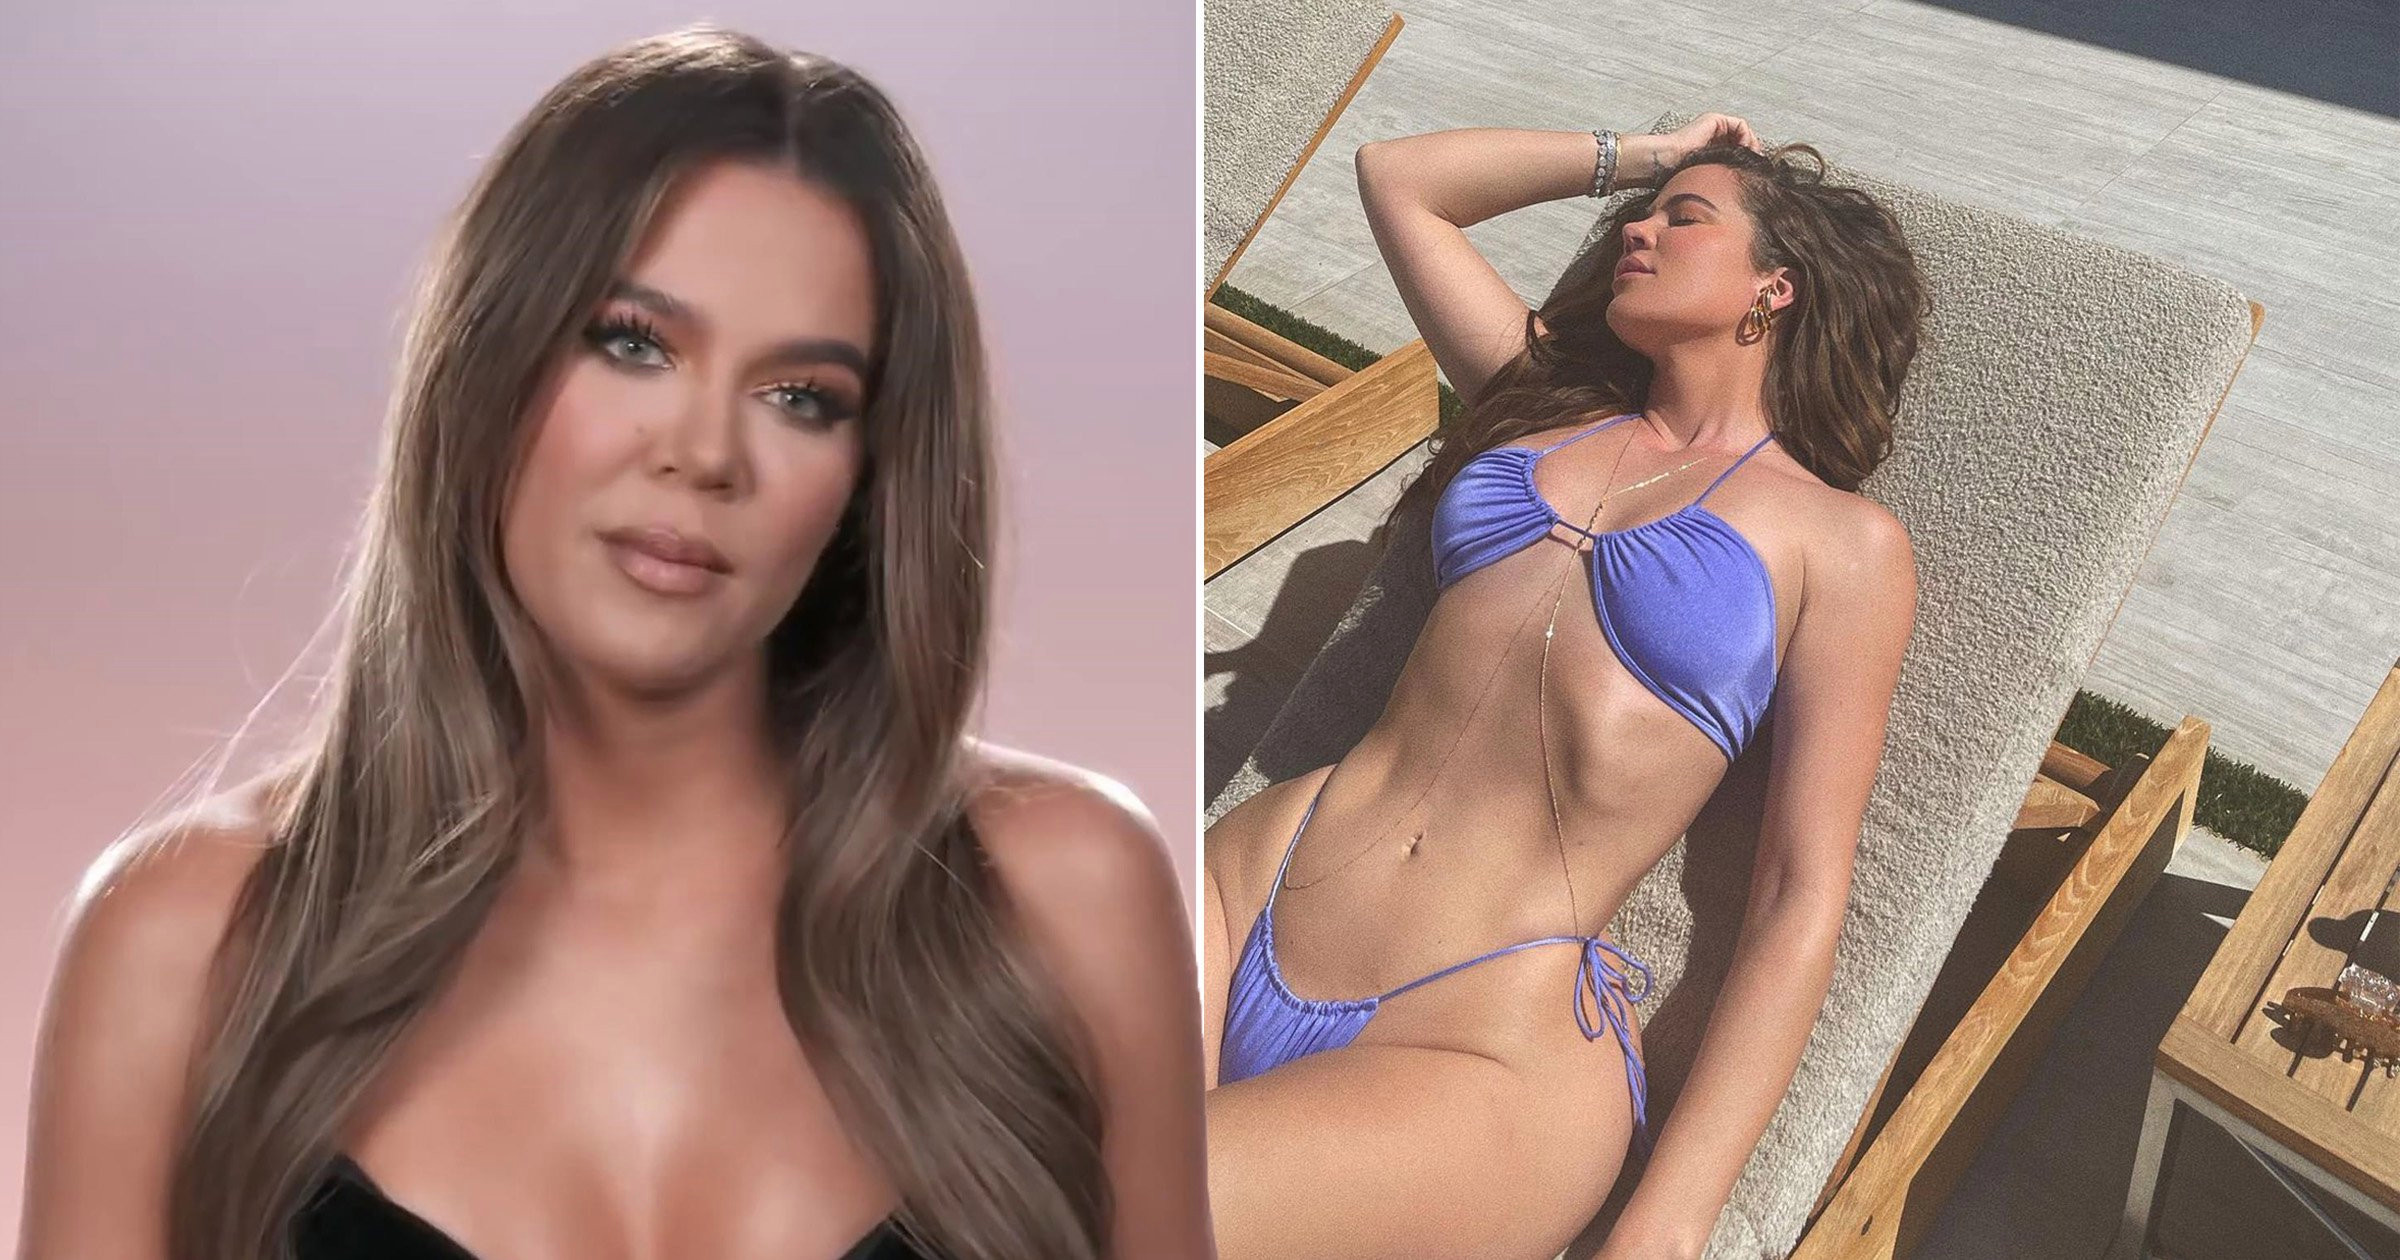 Khloe Kardashian missed the perfect opportunity to own the ‘unedited’ image and flip the script on Instagram expectations